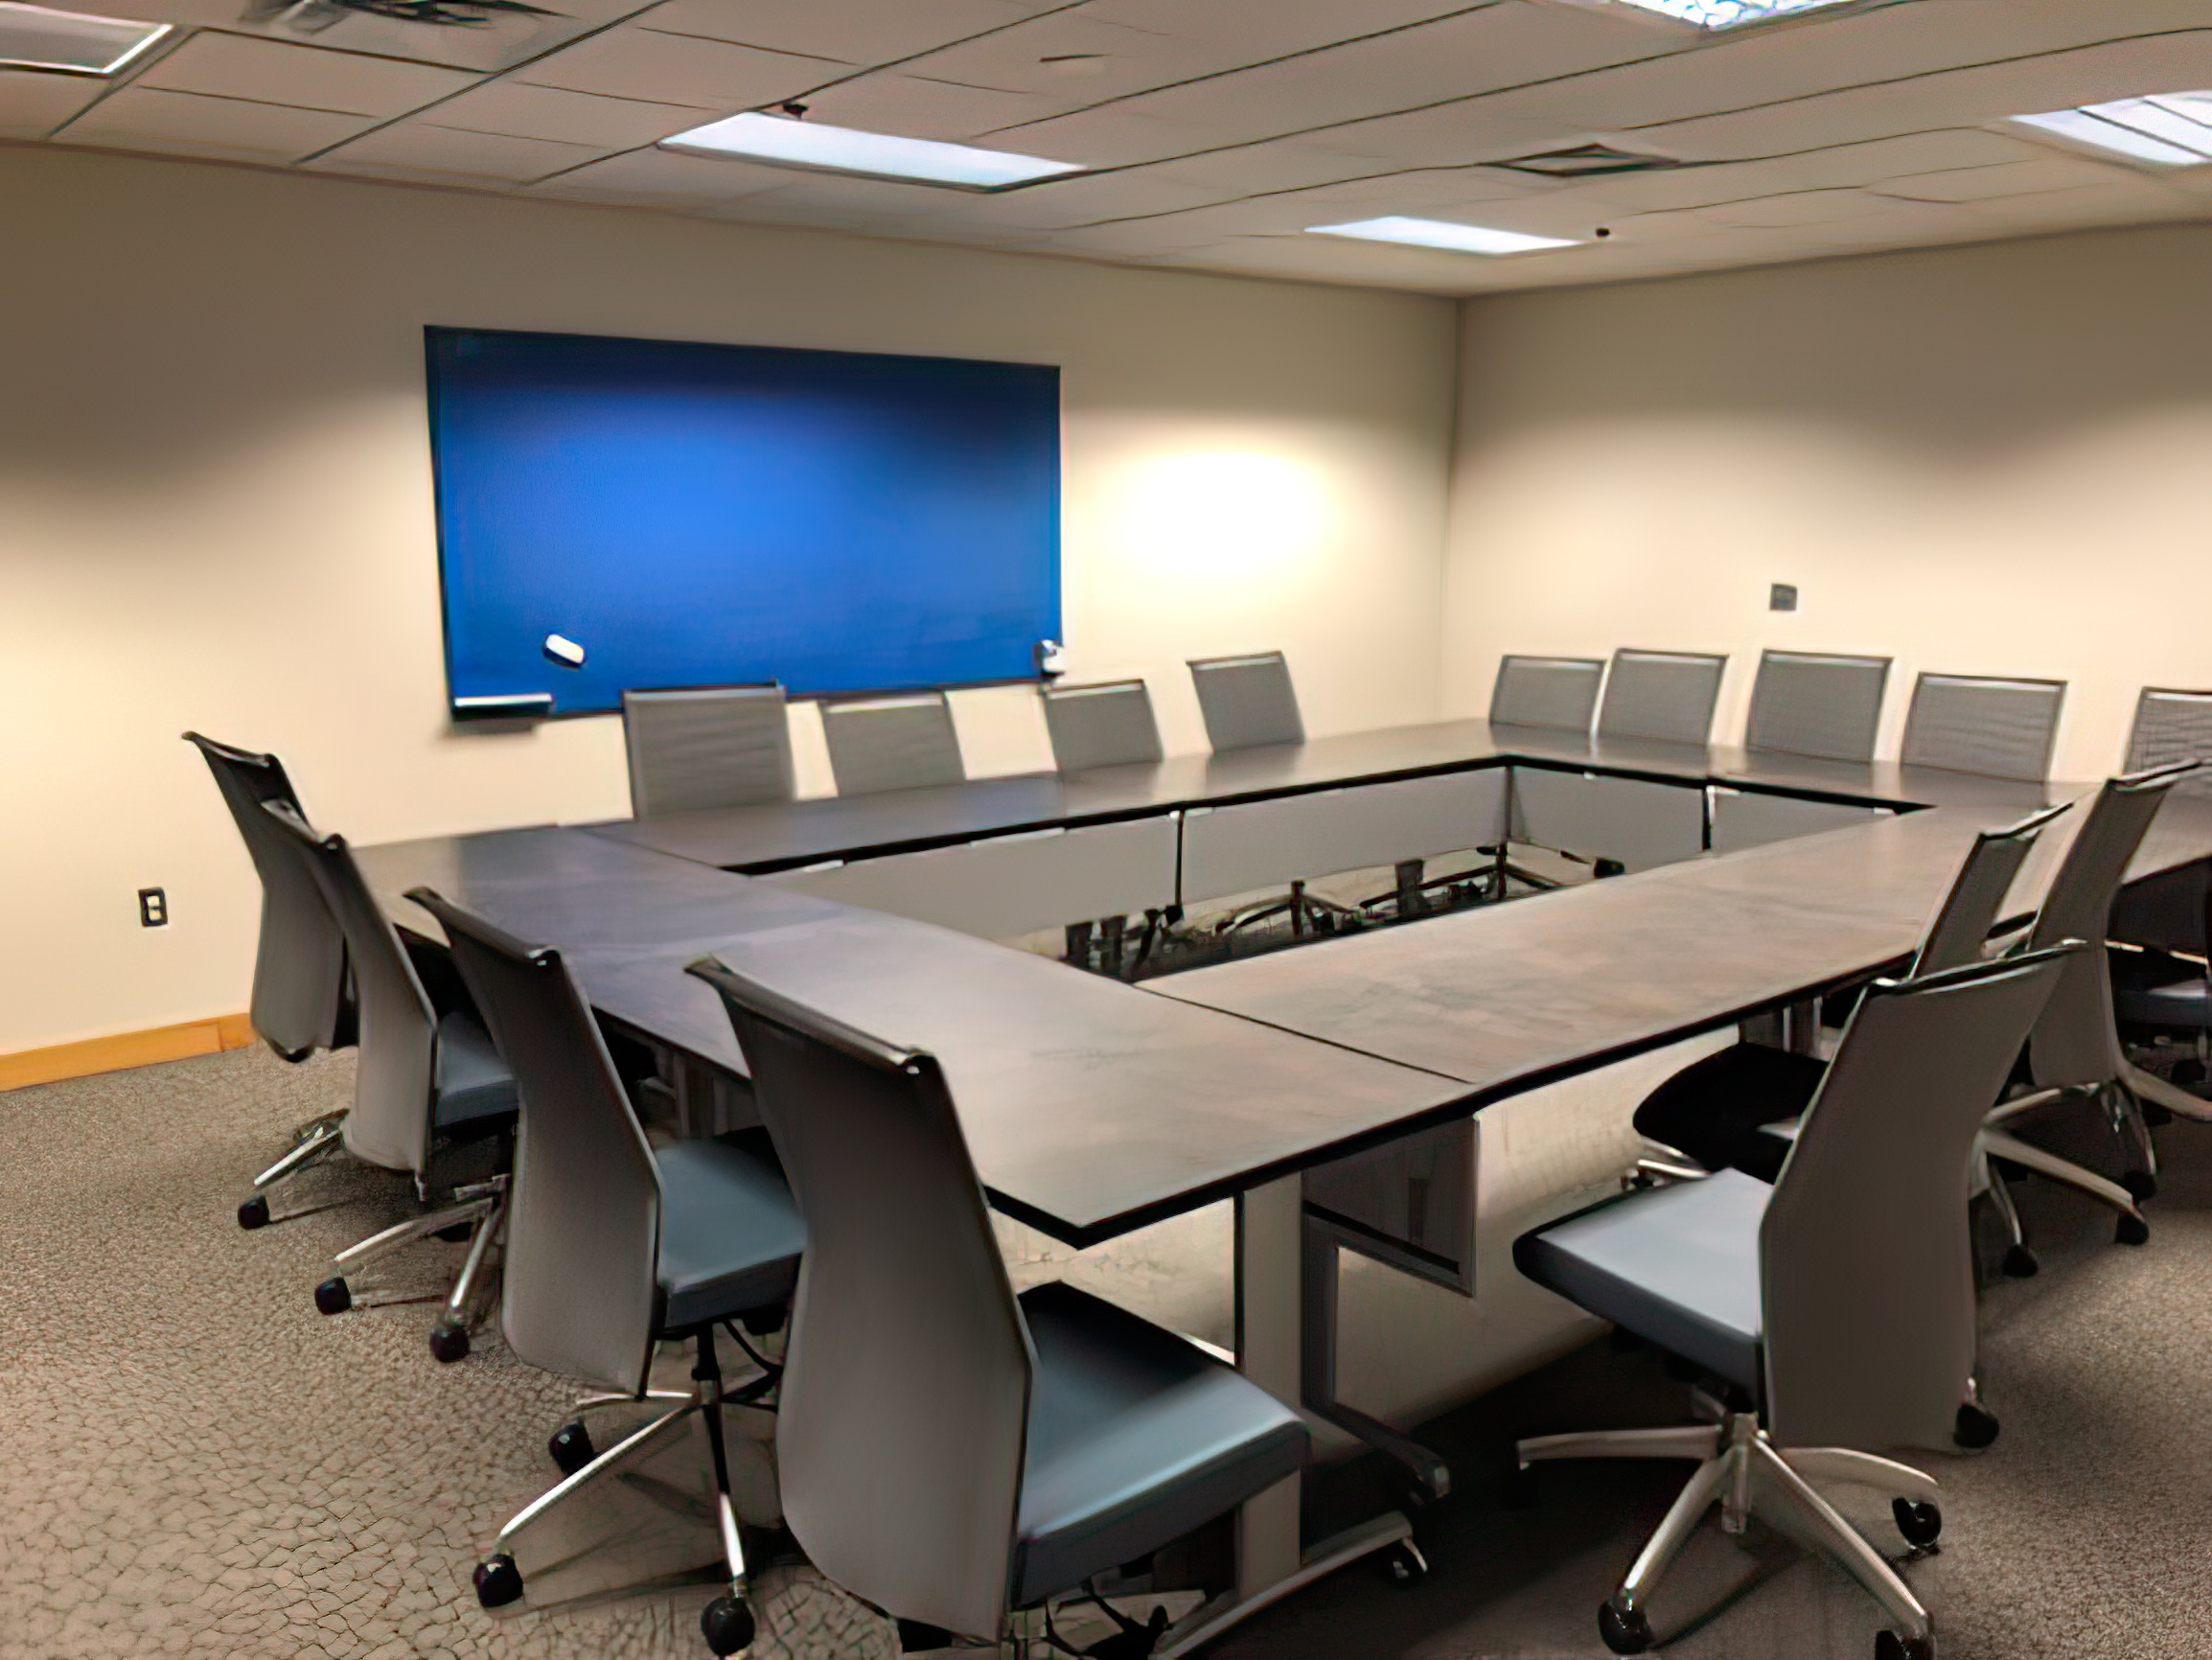 An empty room with a large table surrounded by chairs. A marker board hangs on the wall nearby.